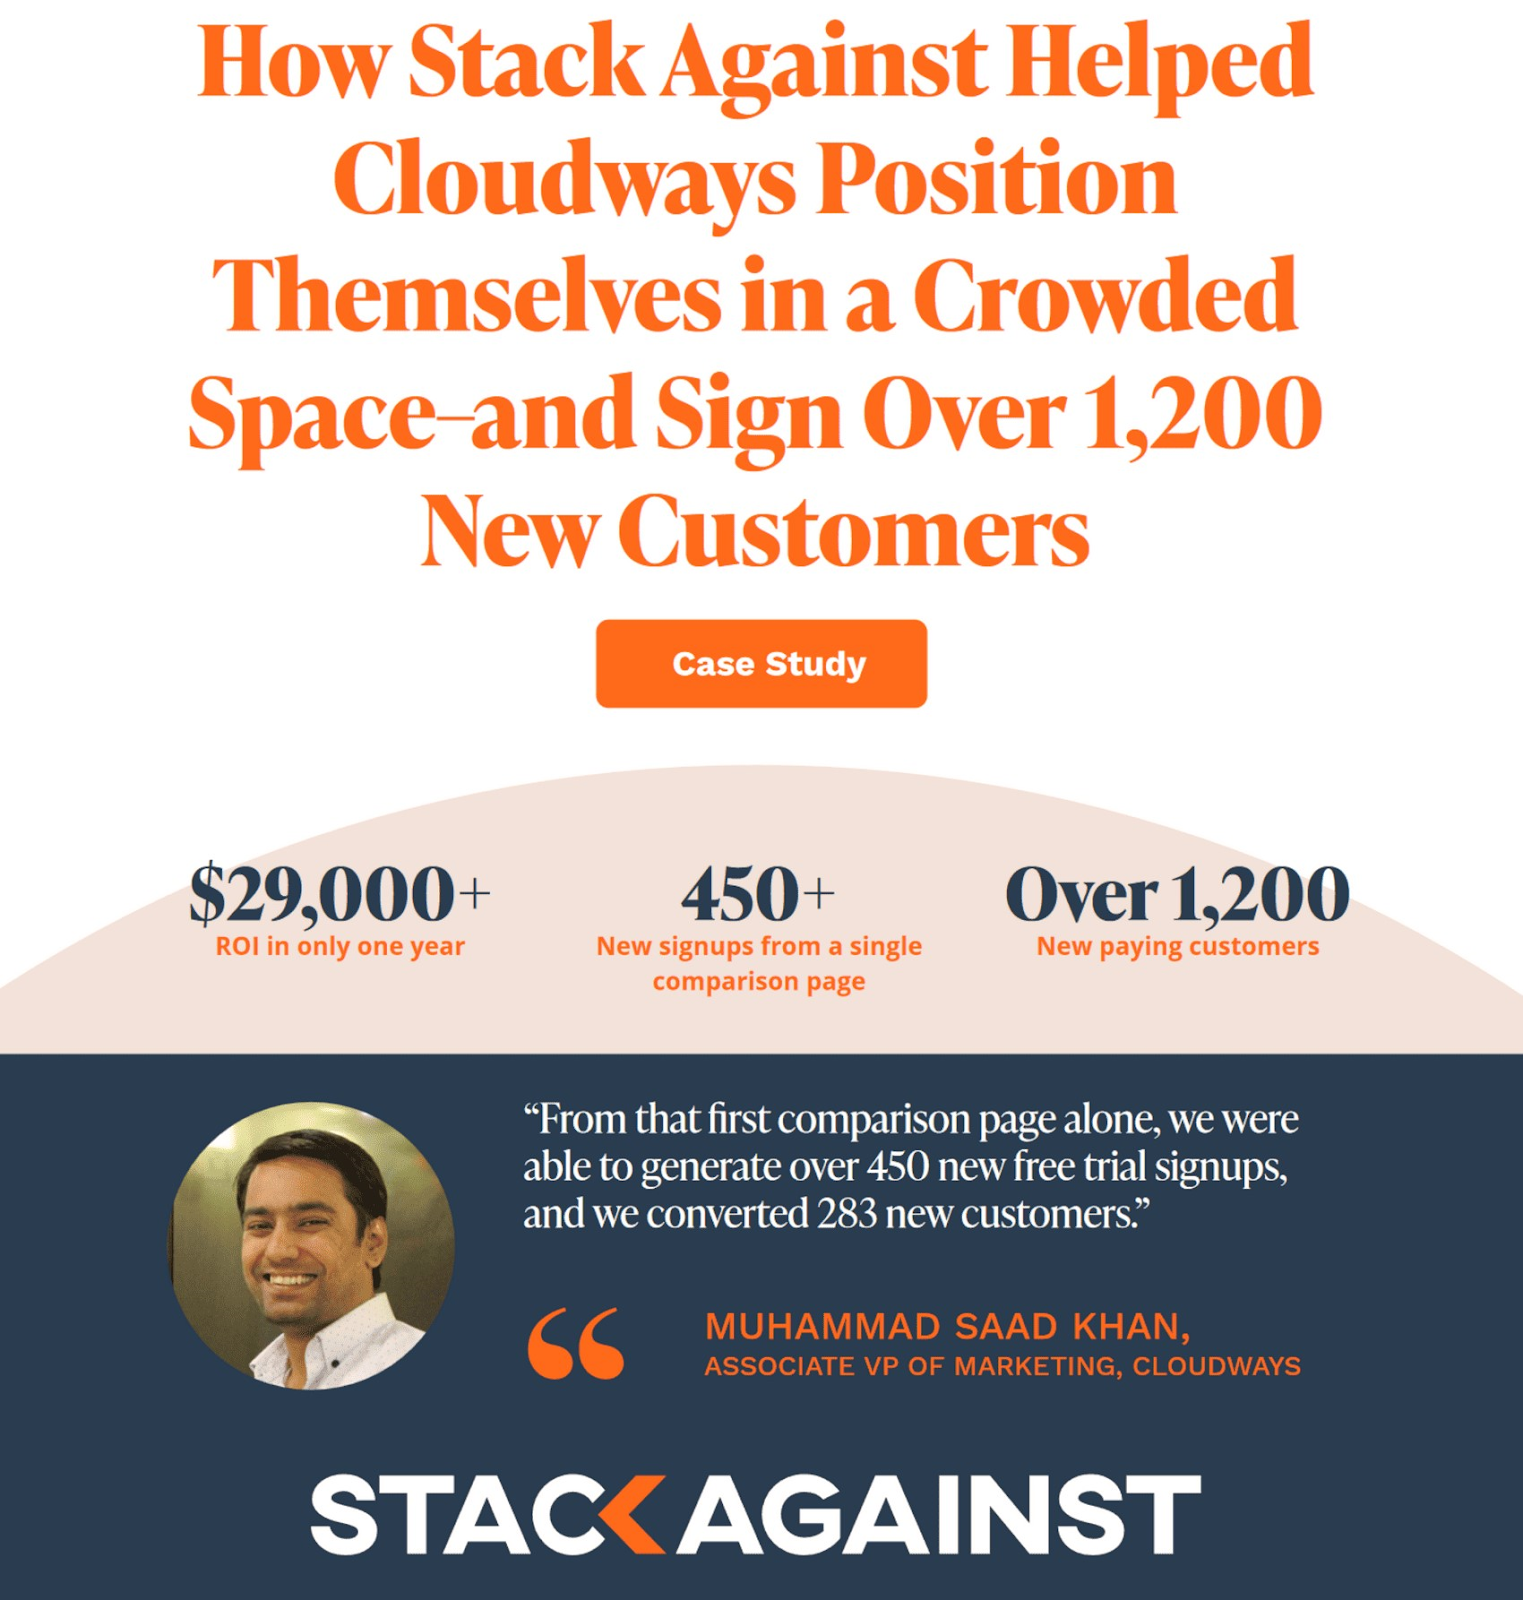 Stack Against's "How Stack Against helped Cloudways position themselves in a crowded space-and sign over 1,200 new customers" case study page